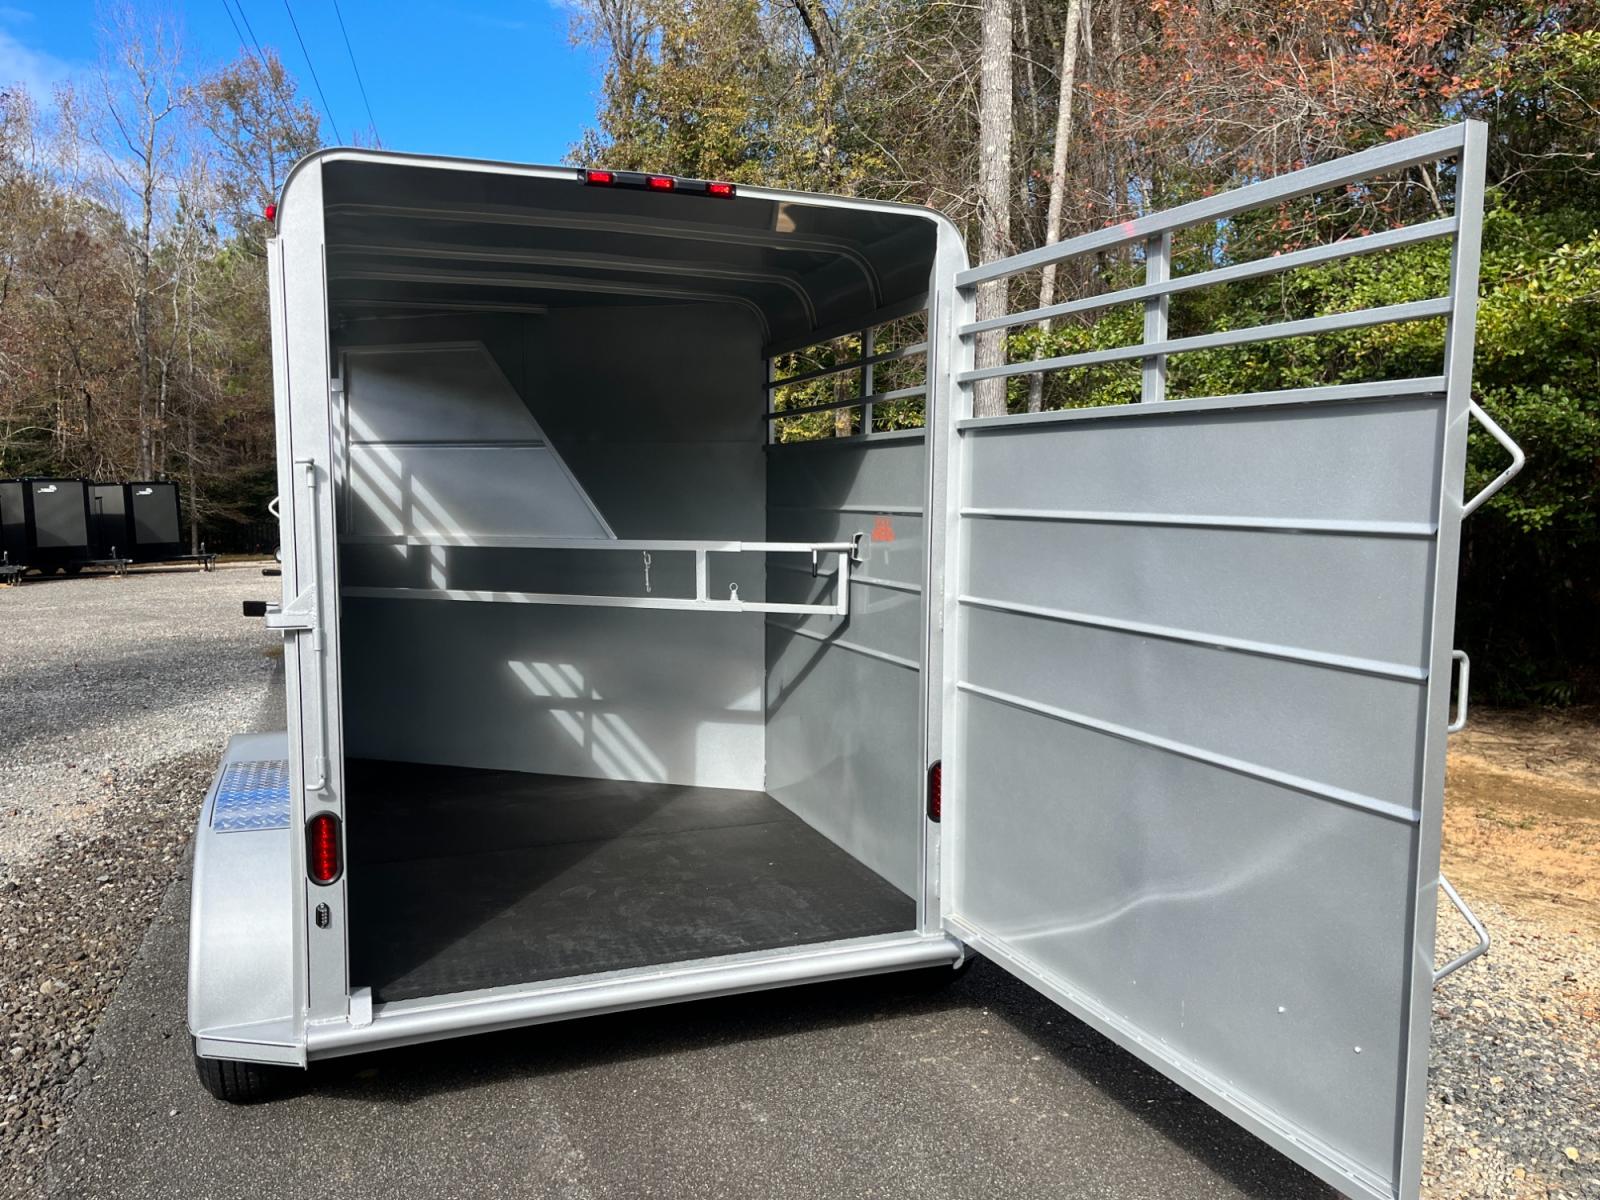 2023 Silver Metallic Calico 2 Horse Slant , located at 1330 Rainey Rd., Macon, 31220, (478) 960-1044, 32.845638, -83.778687 - Brand New 2023 Model 2 Horse Slant Calico Brand Trailer! 6ft Wide X 13ft Long Deluxe Model Tandem Axle Trailer! Easy Close Slant Divider Latch! 16" Radials! Beautiful Silver Metallic Paint is Awesome! Black Pin Striping Looks Fantastic! Fully Caulked Inside and Out to Prevent Rust! The Paint i - Photo #16